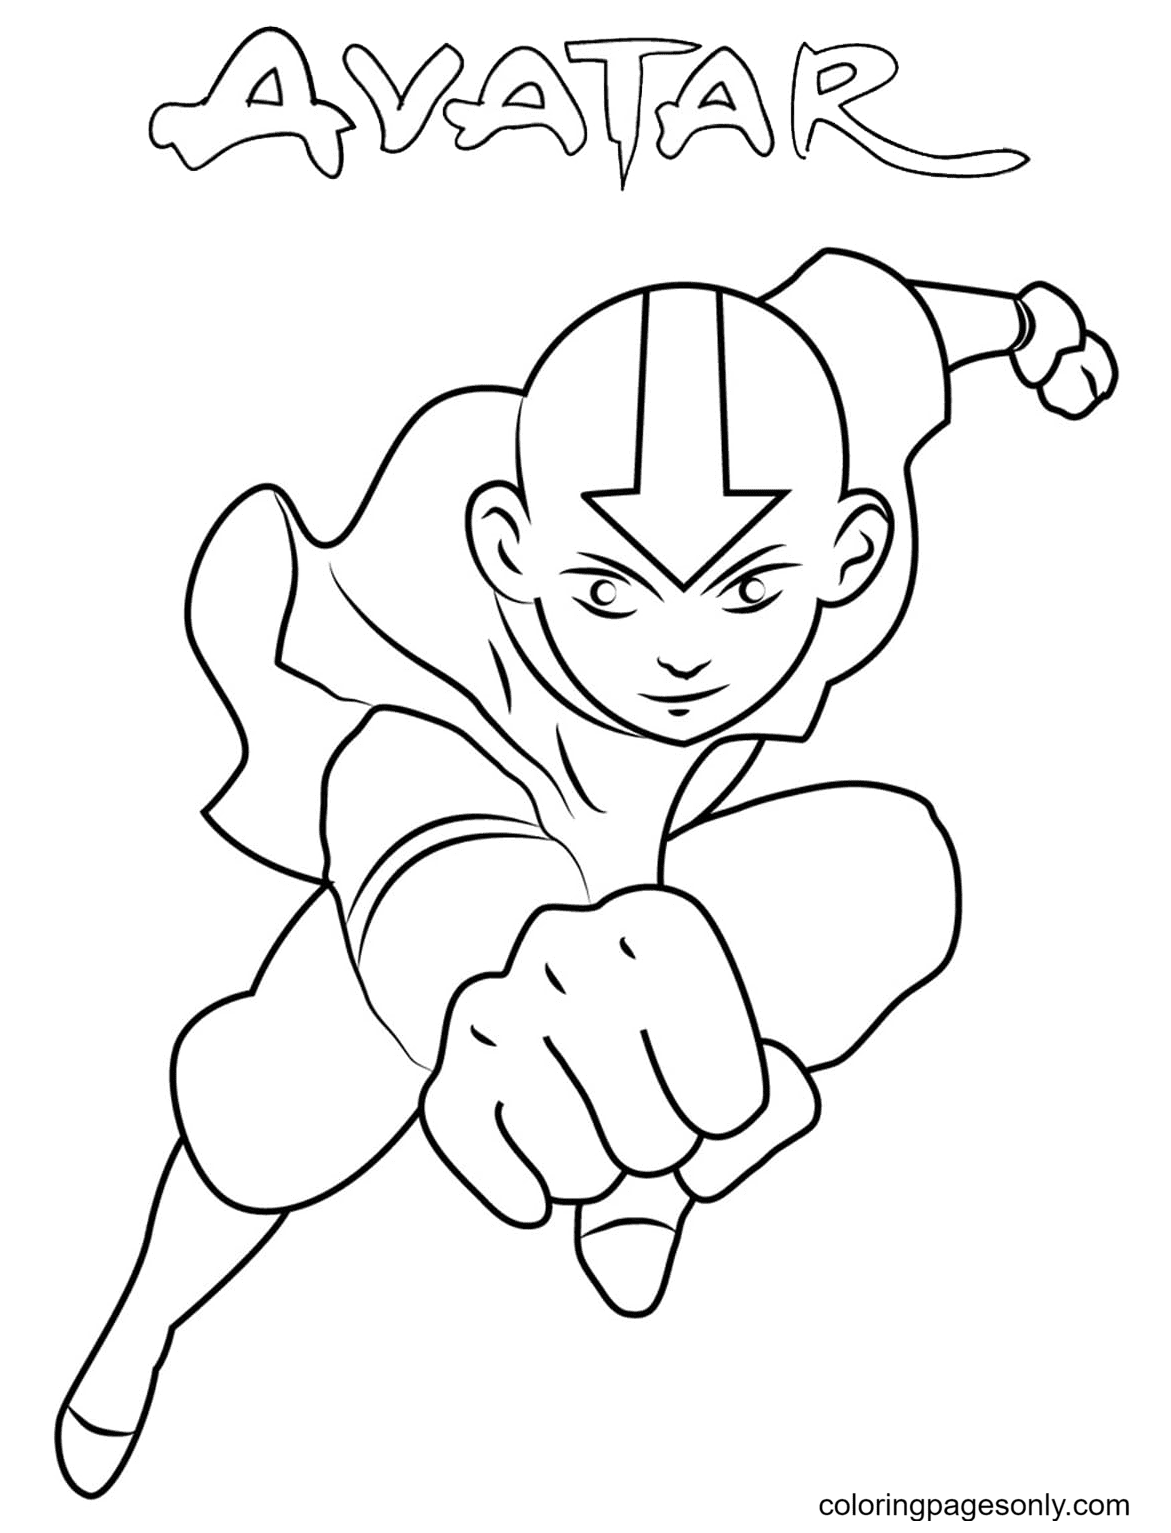 Avatar Aang Coloring Page